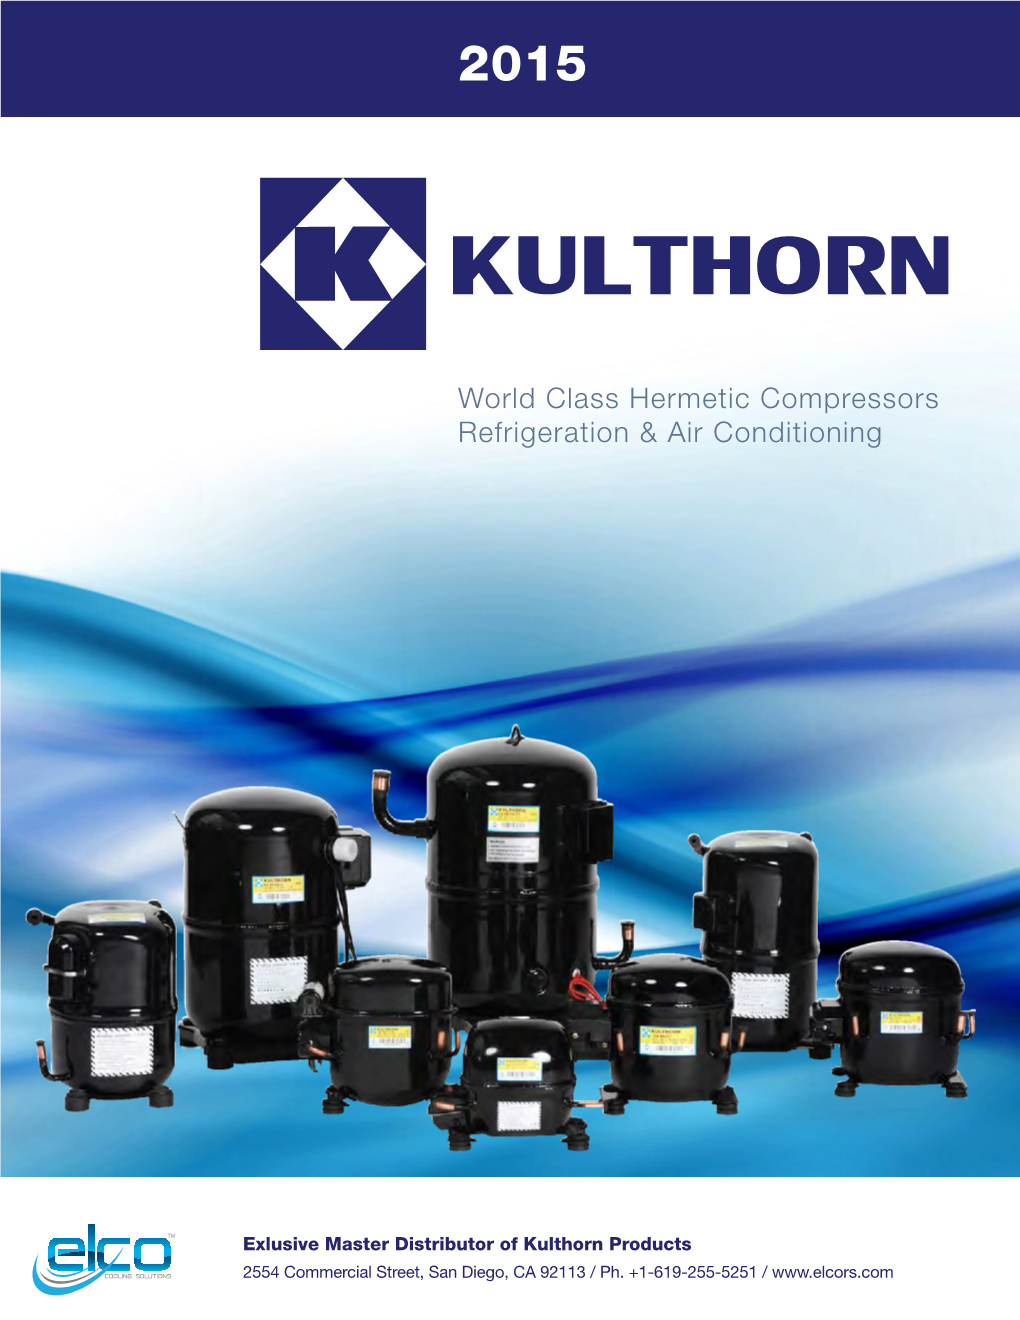 World Class Hermetic Compressors Refrigeration & Air Conditioning